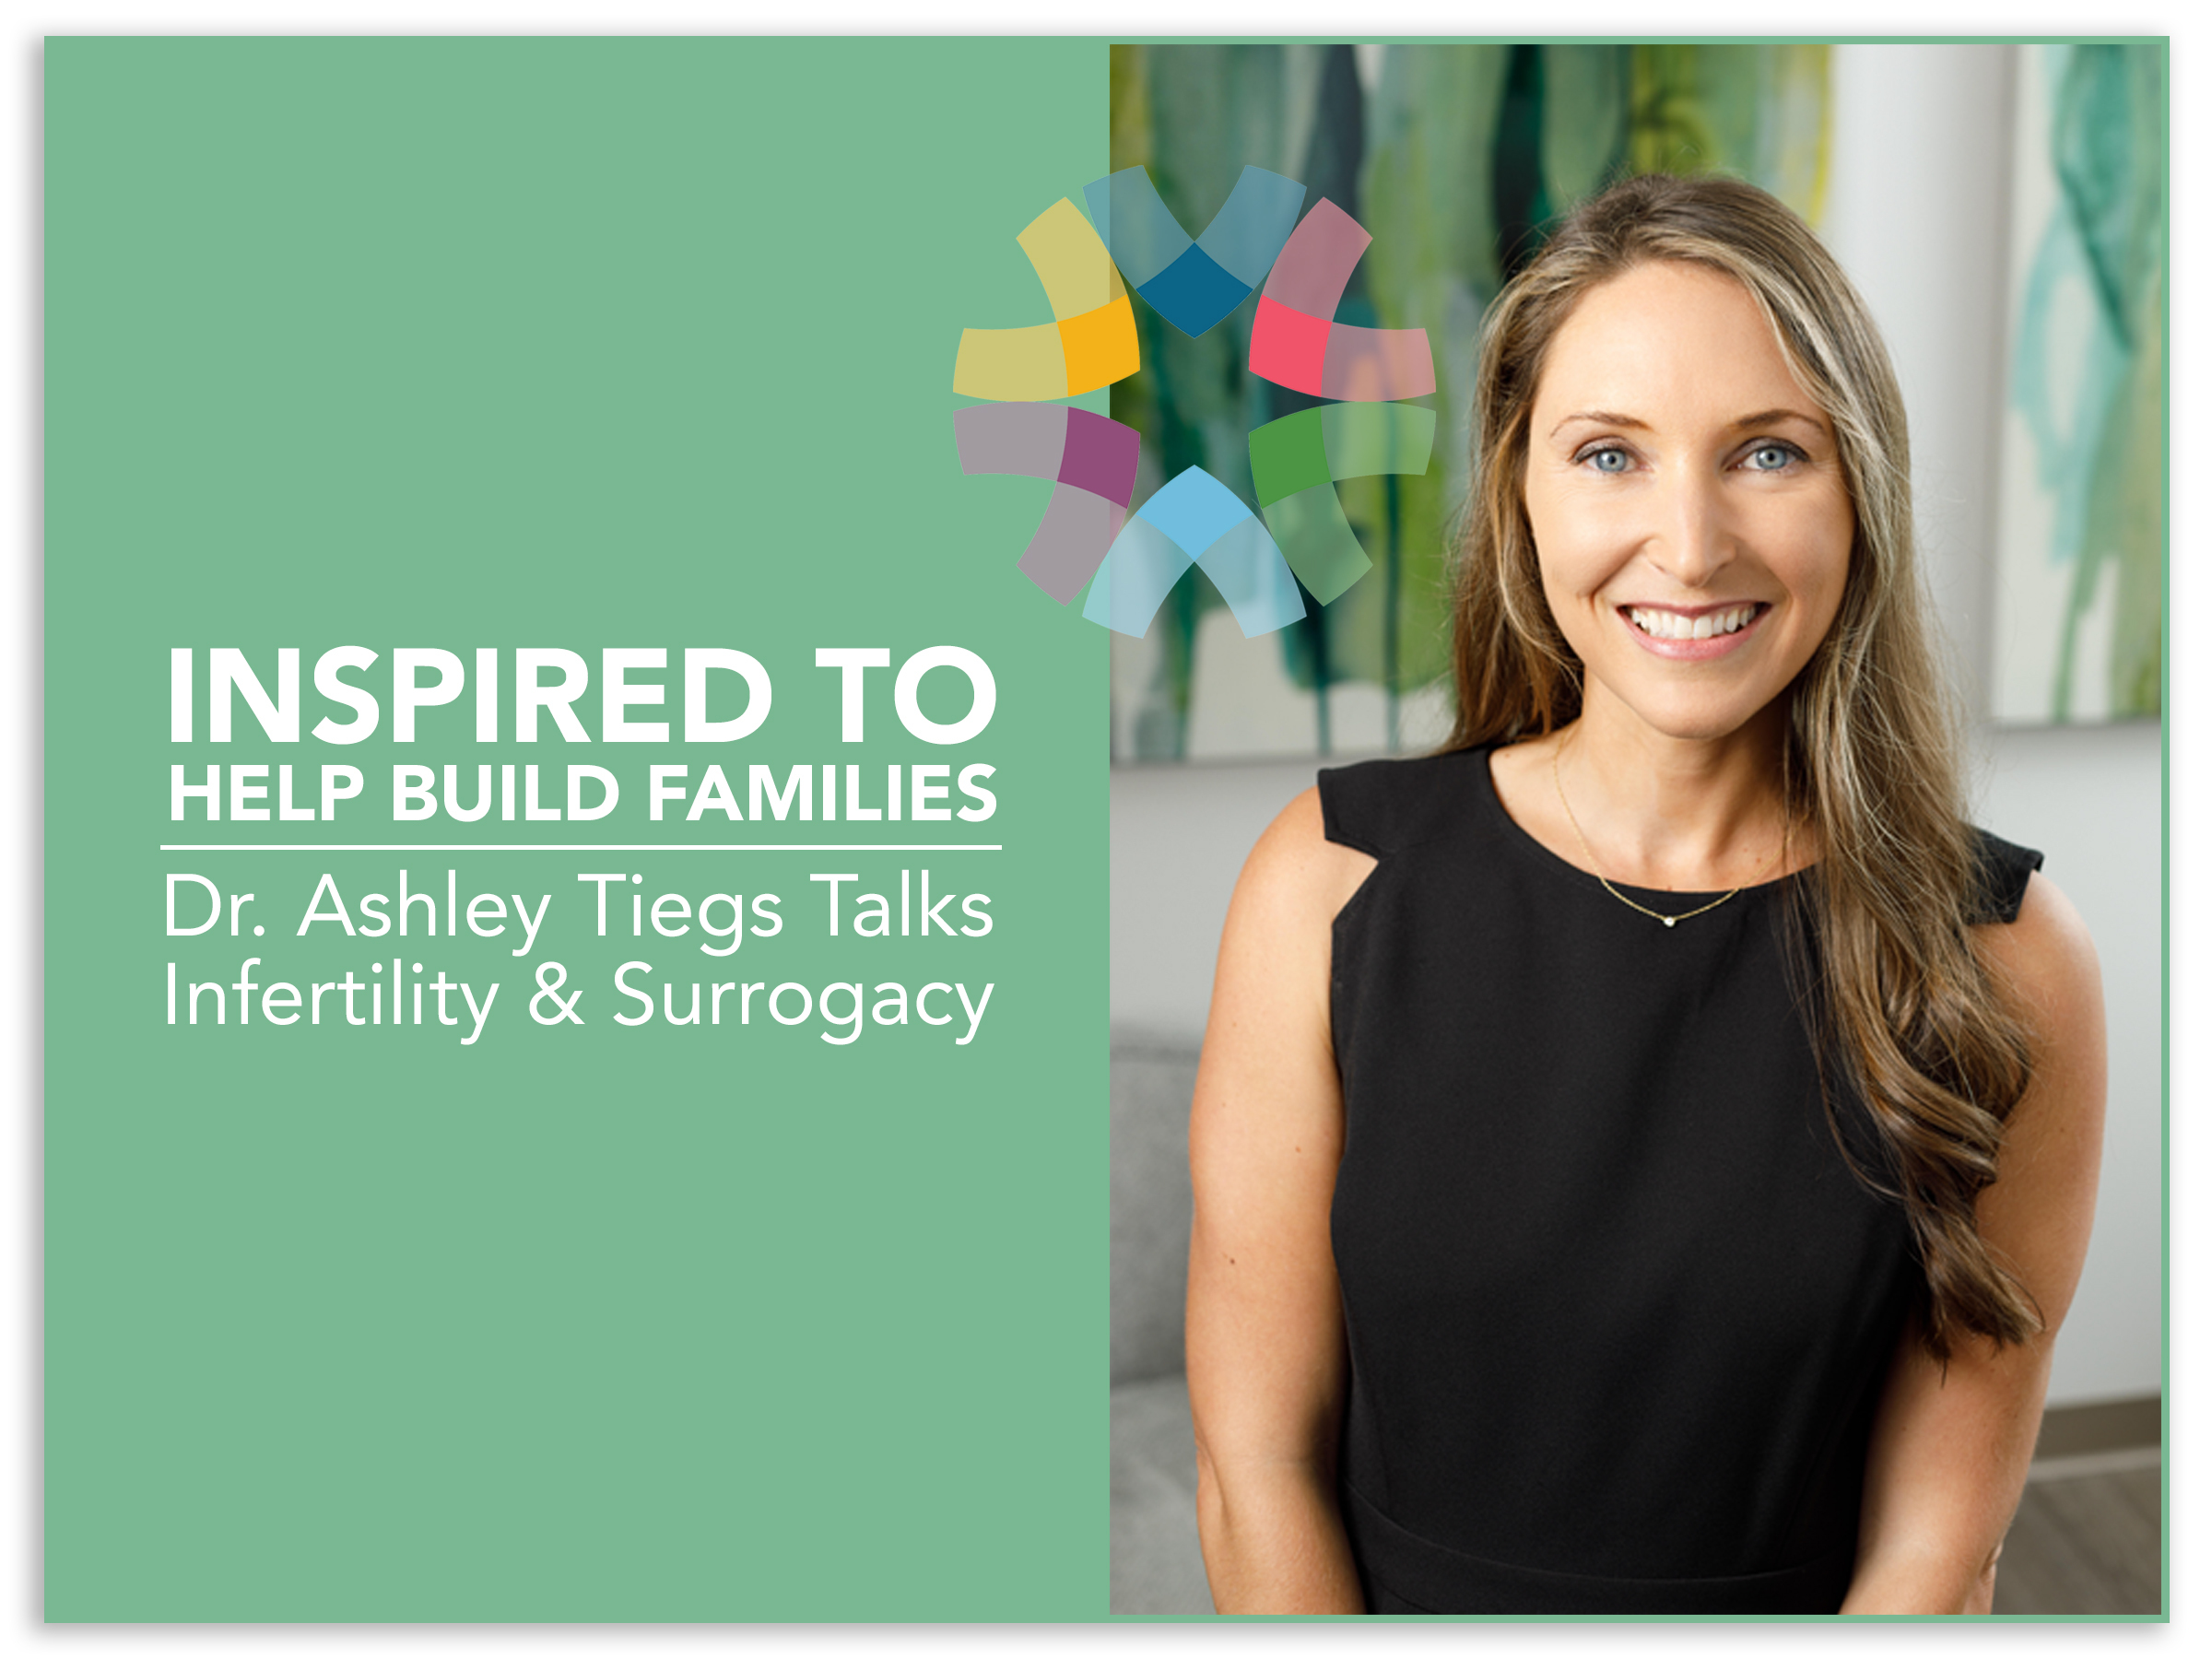 Dr. Ashley Tiegs Talks About Infertility and Surrogacy